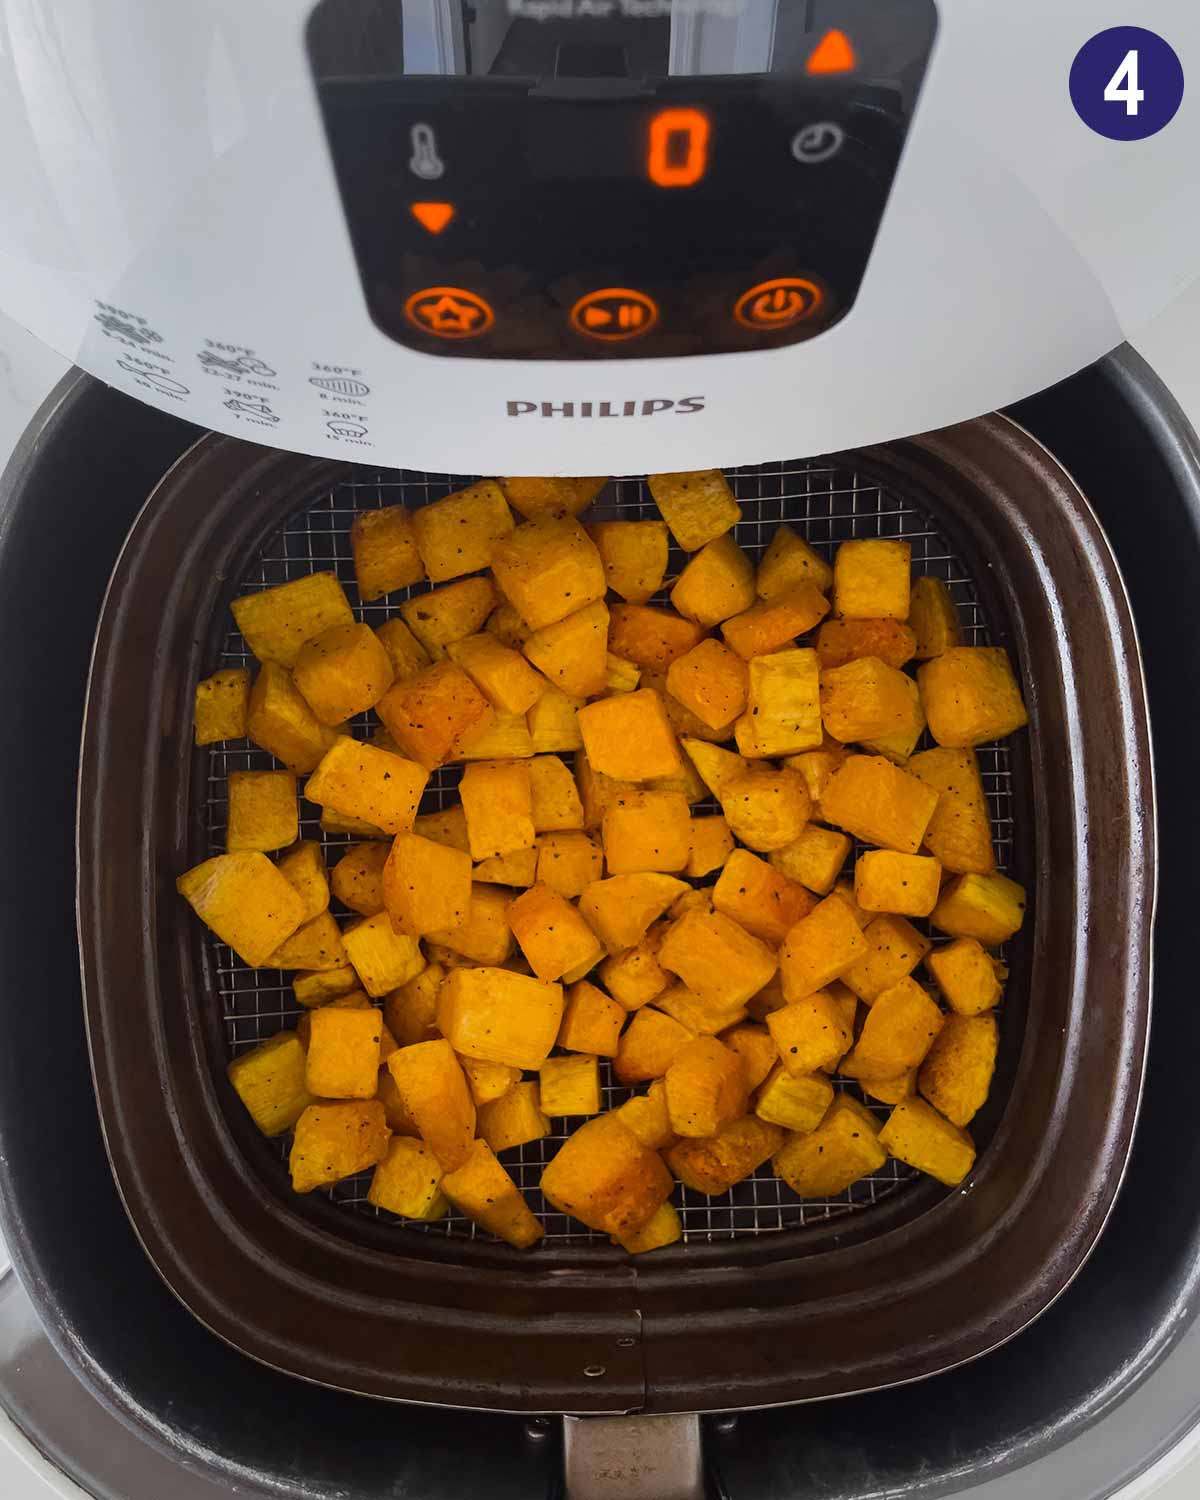 Diced butternut squash in Air Fryer basket during cooking.